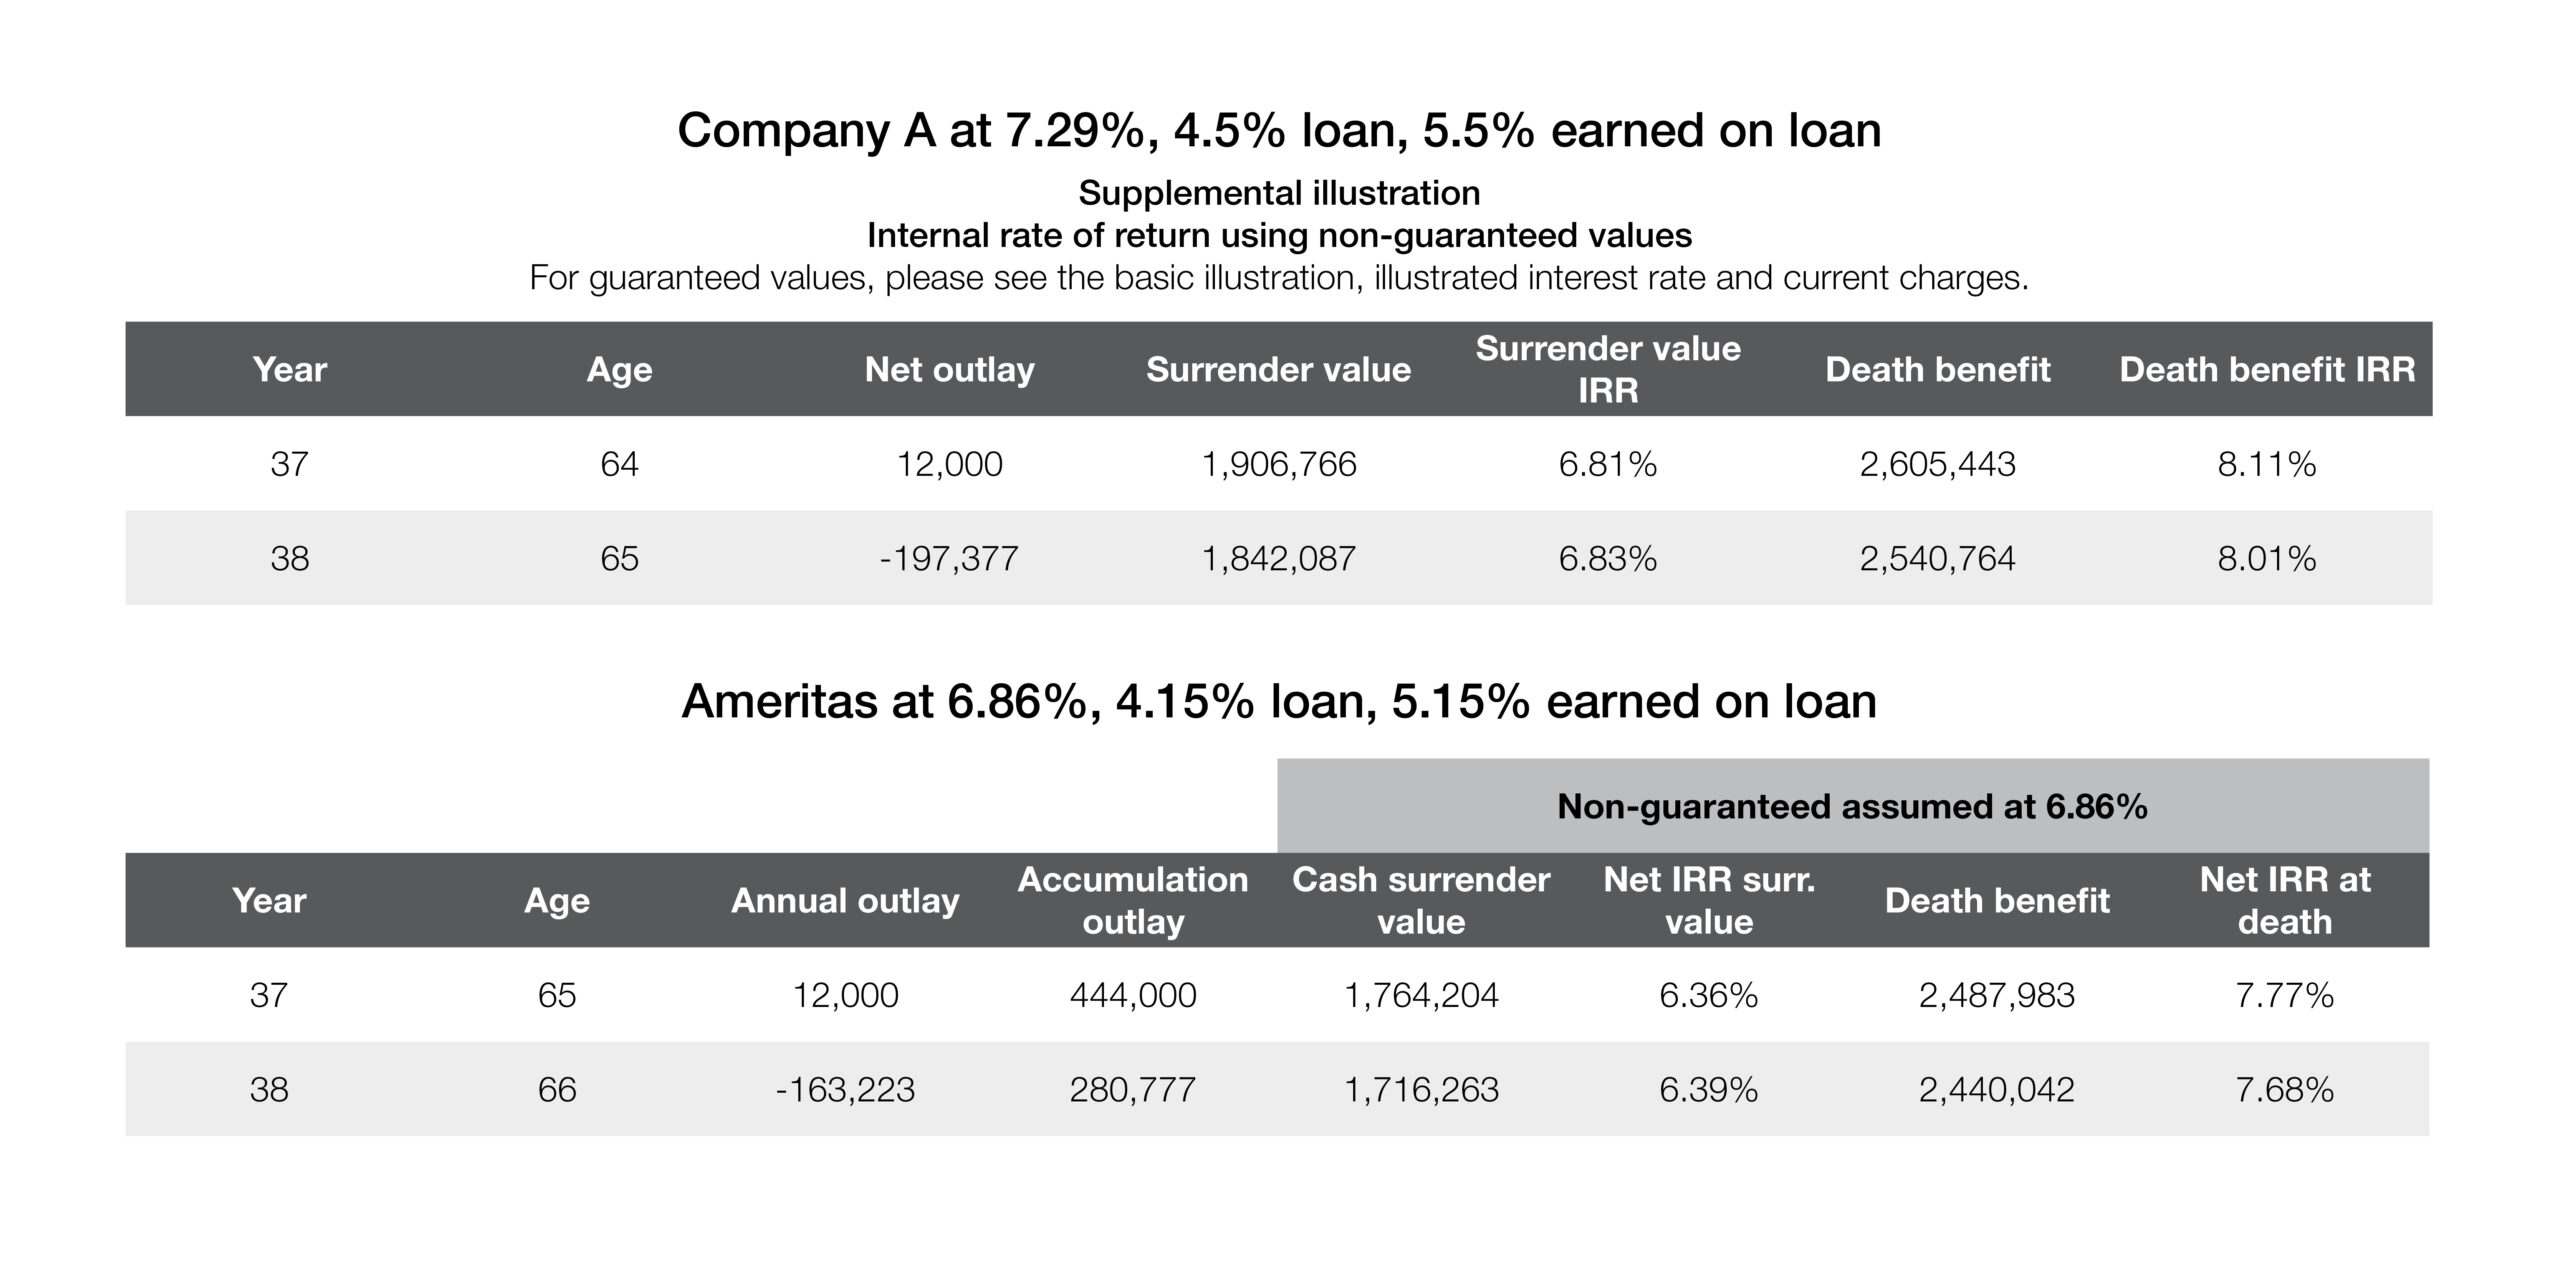 Company A at 7.29%, 4.5% loan, 5.5% earned on loan and Ameritas at 6.86%, 4.15% loan, 5.15% earned on loan chart